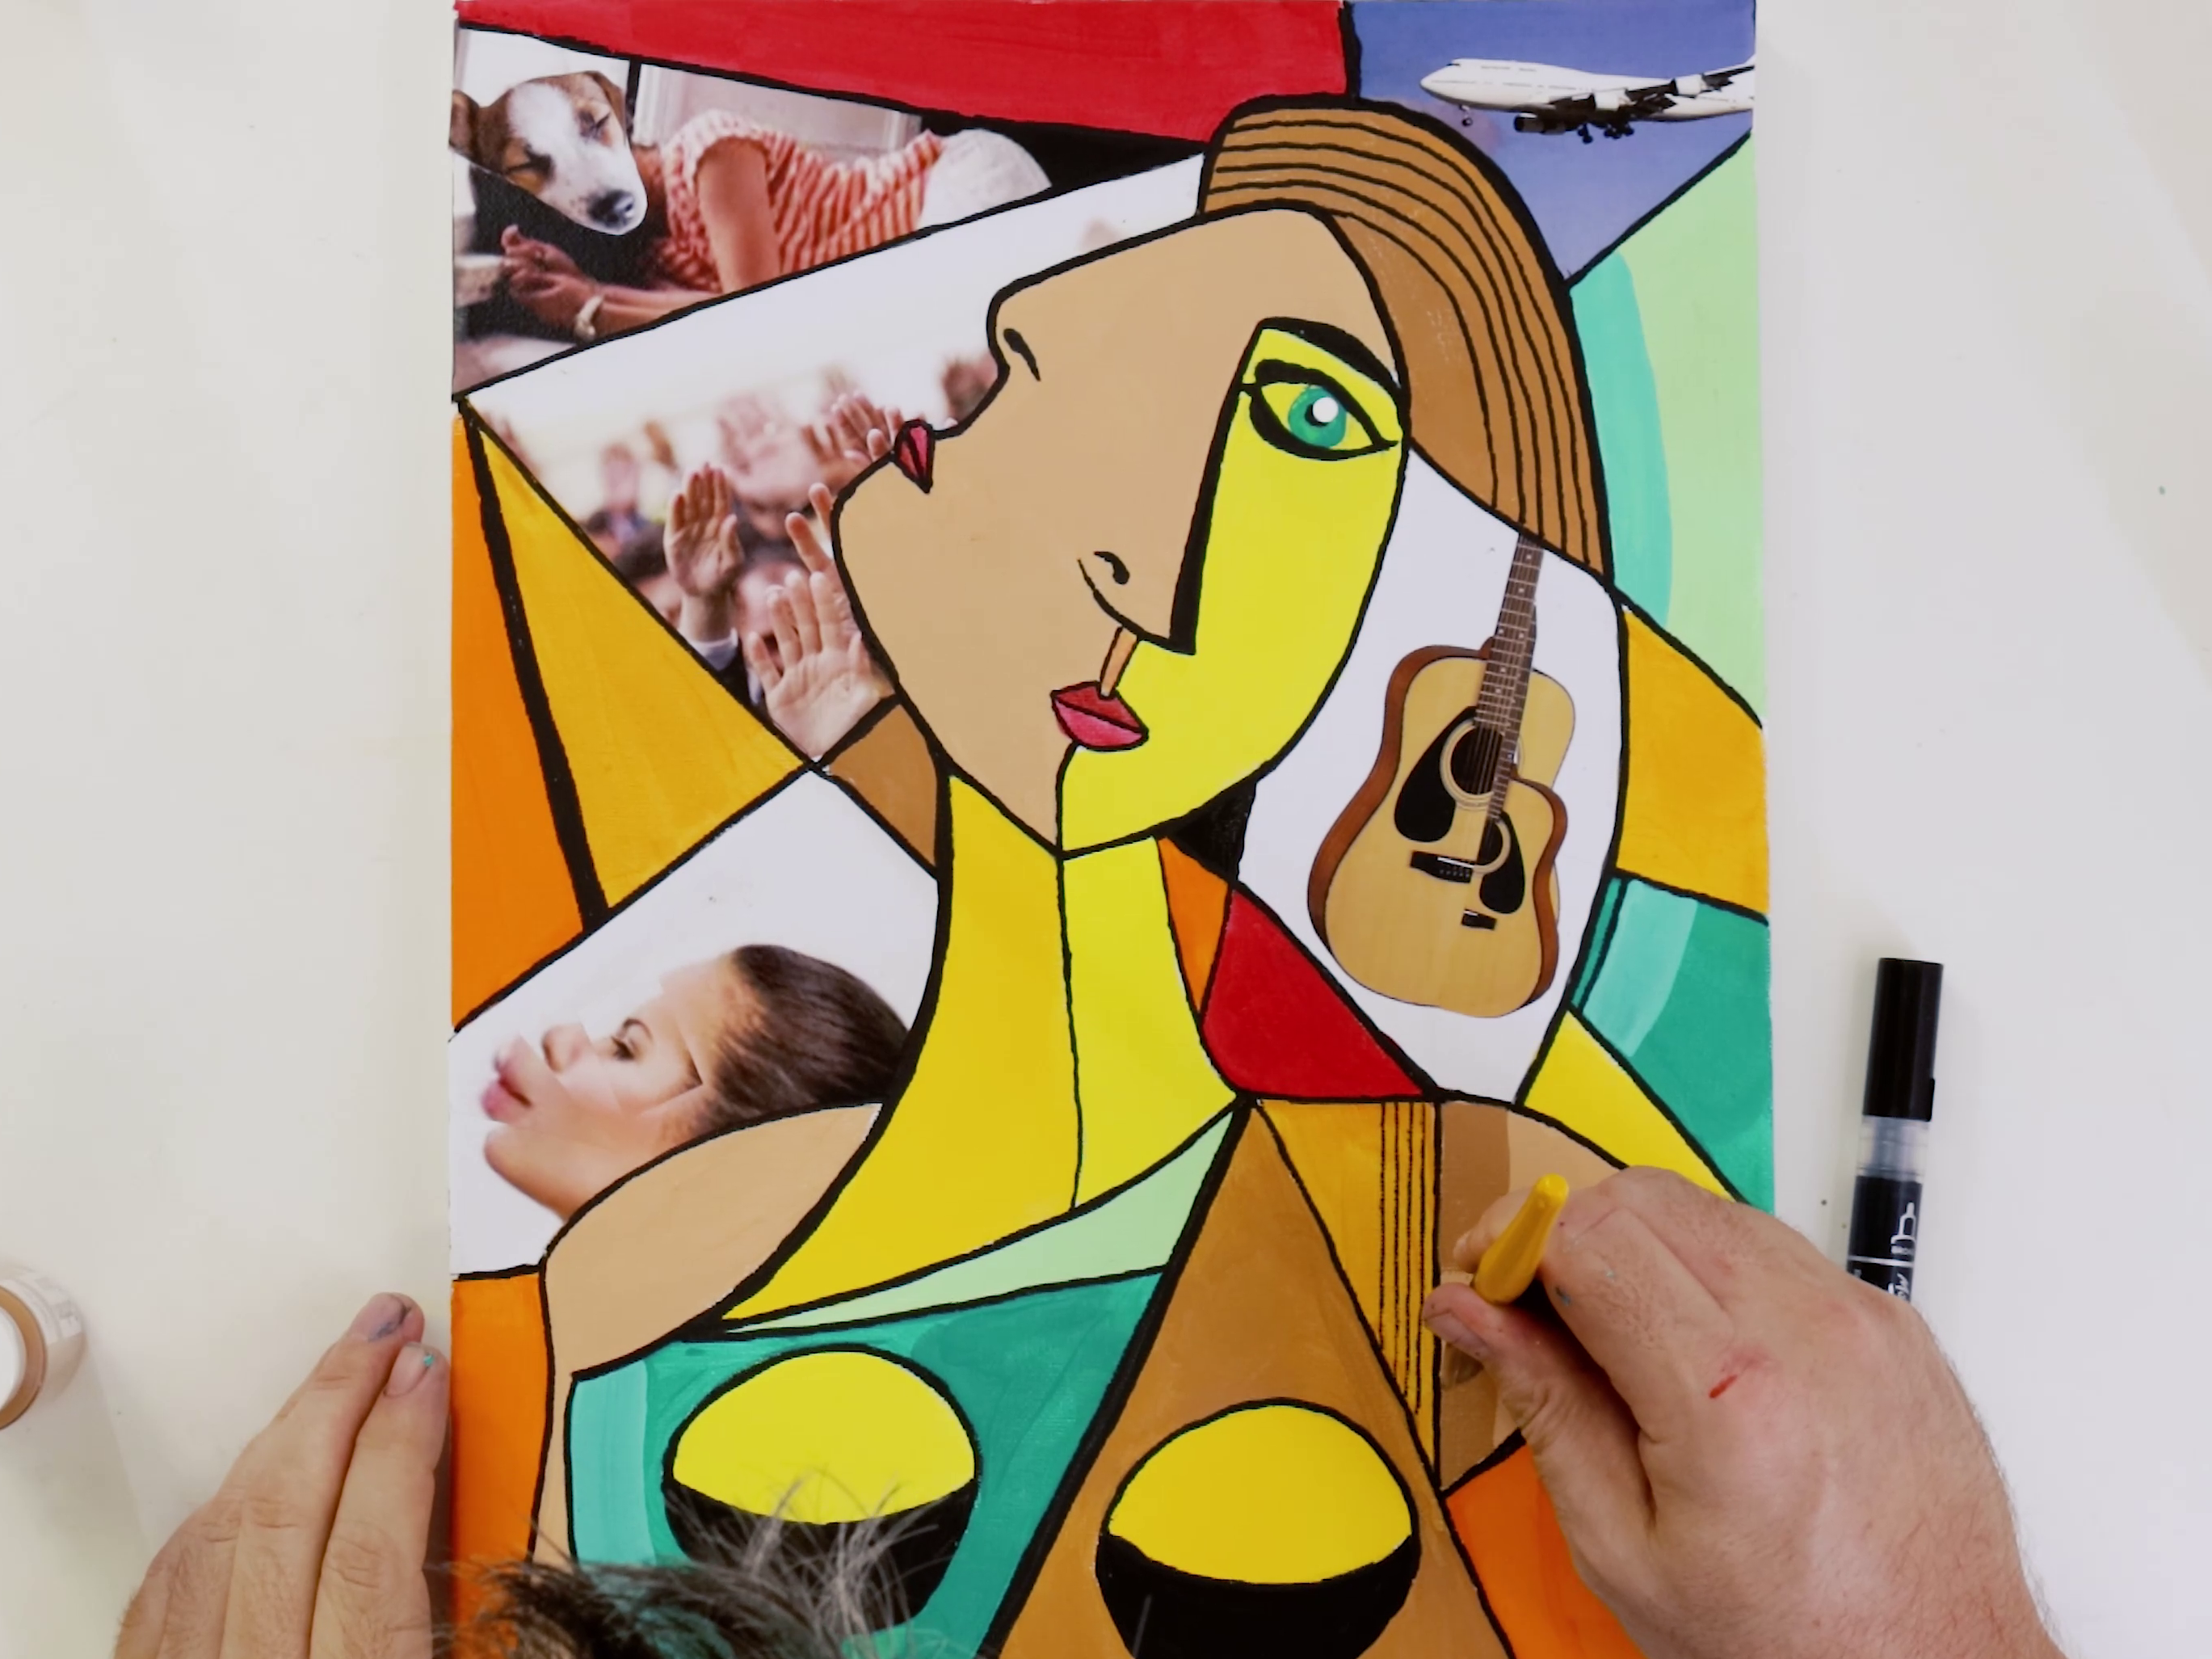 1. Mixed media artwork of a colourful female portrait collage